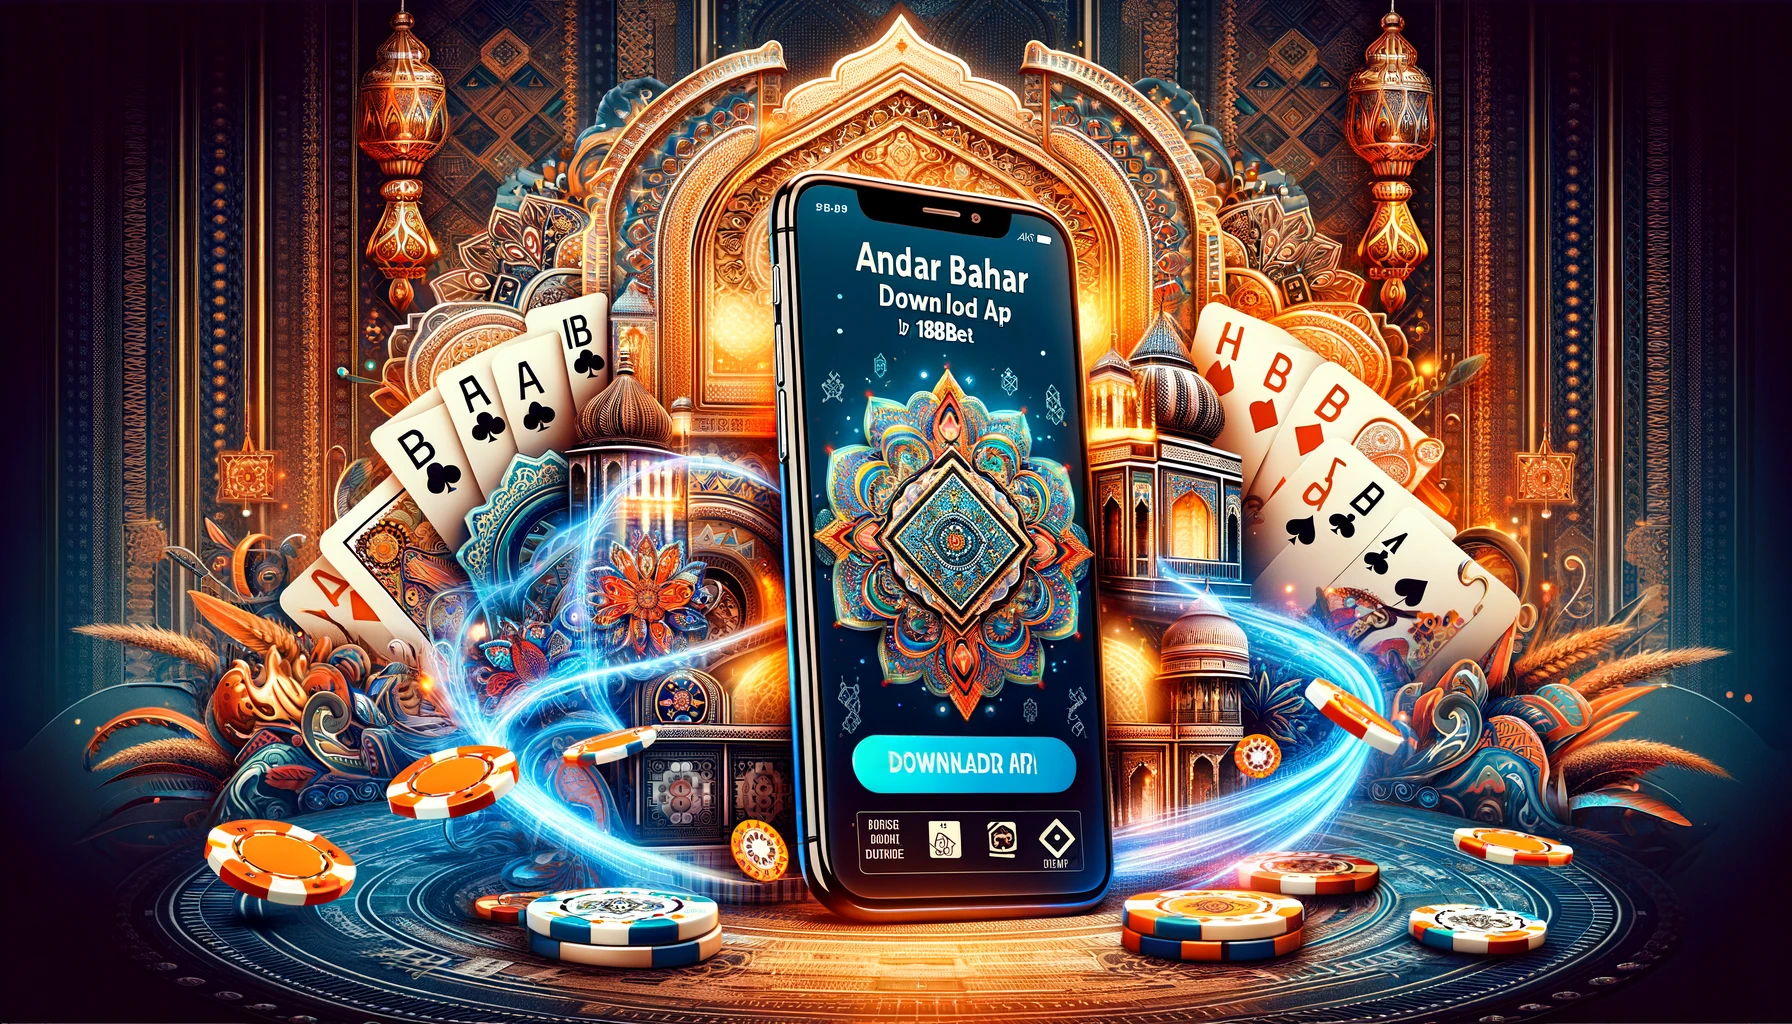 Andar Bahar Download App: Unleashing the Ultimate 188Bet Experience